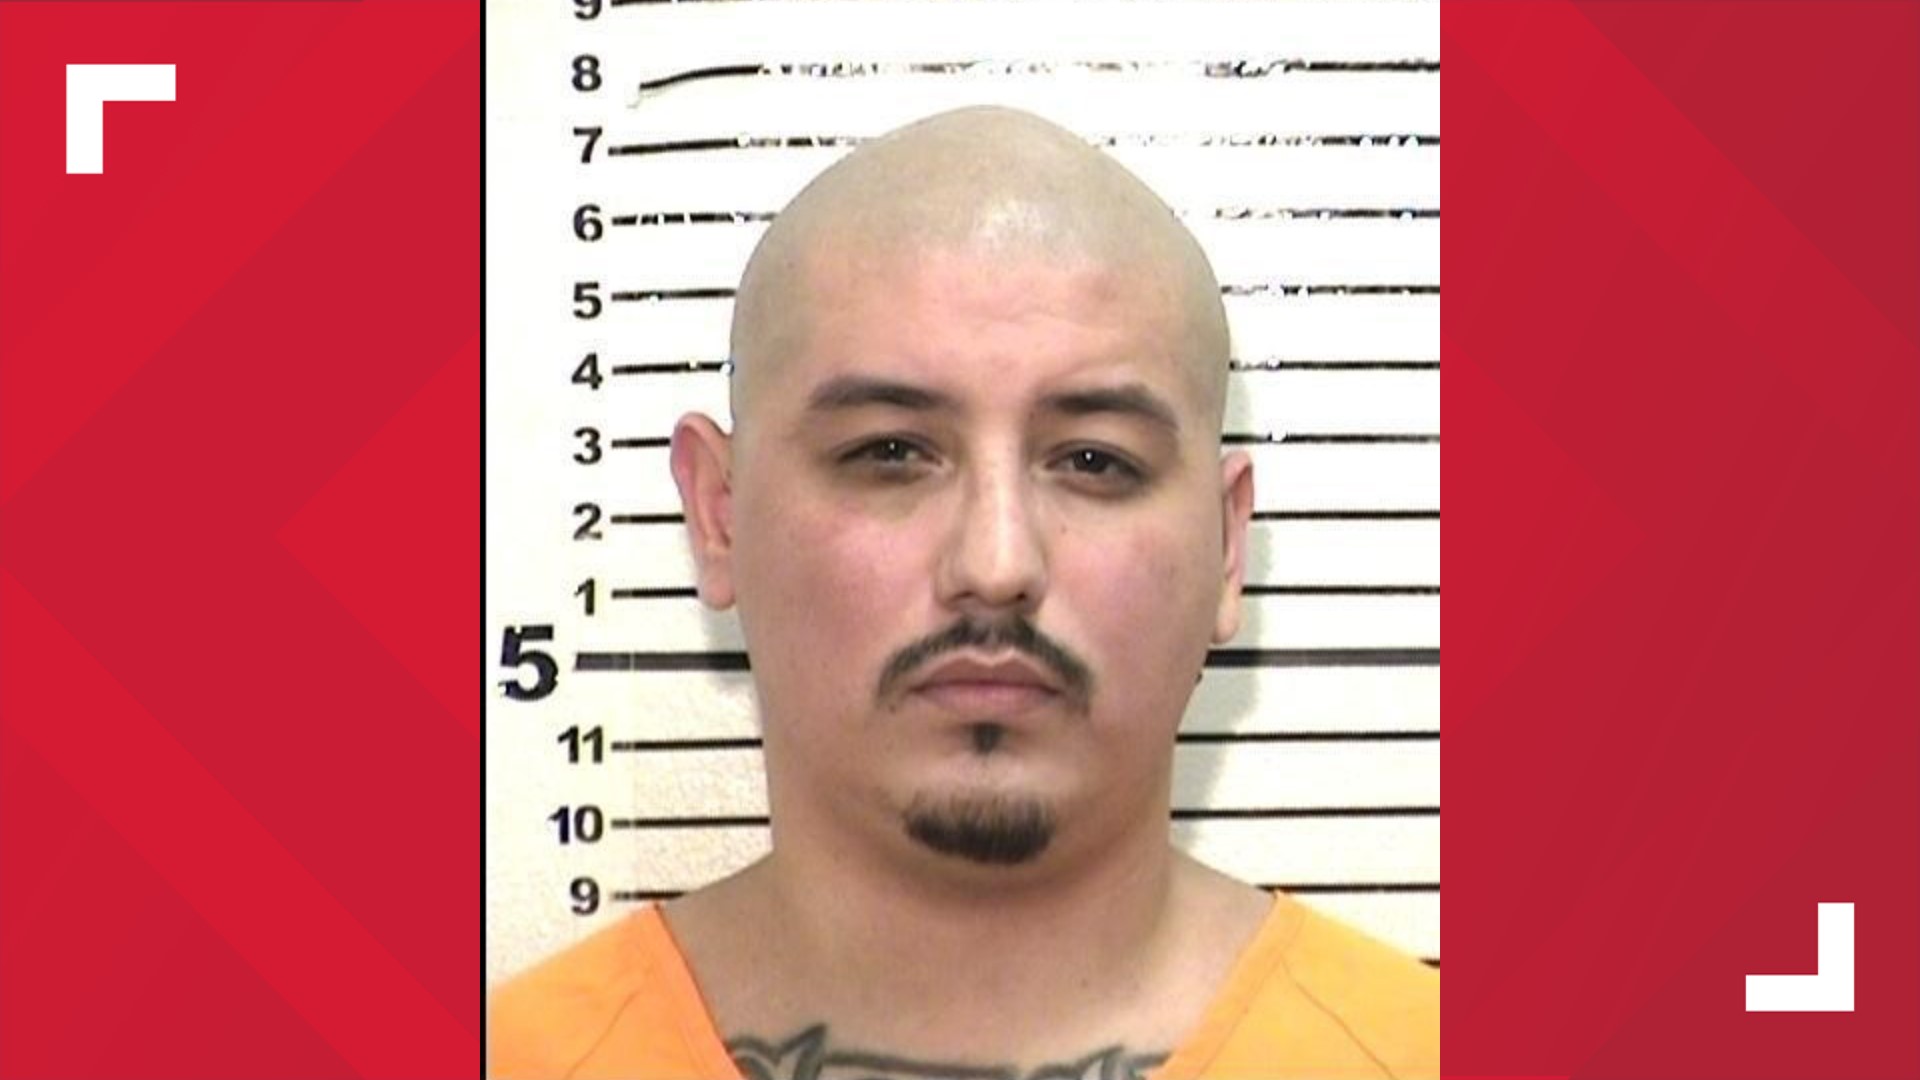 Martin Pacheco, along with two other inmates, attempted to kill another inmate at California State Prison-Sacramento.